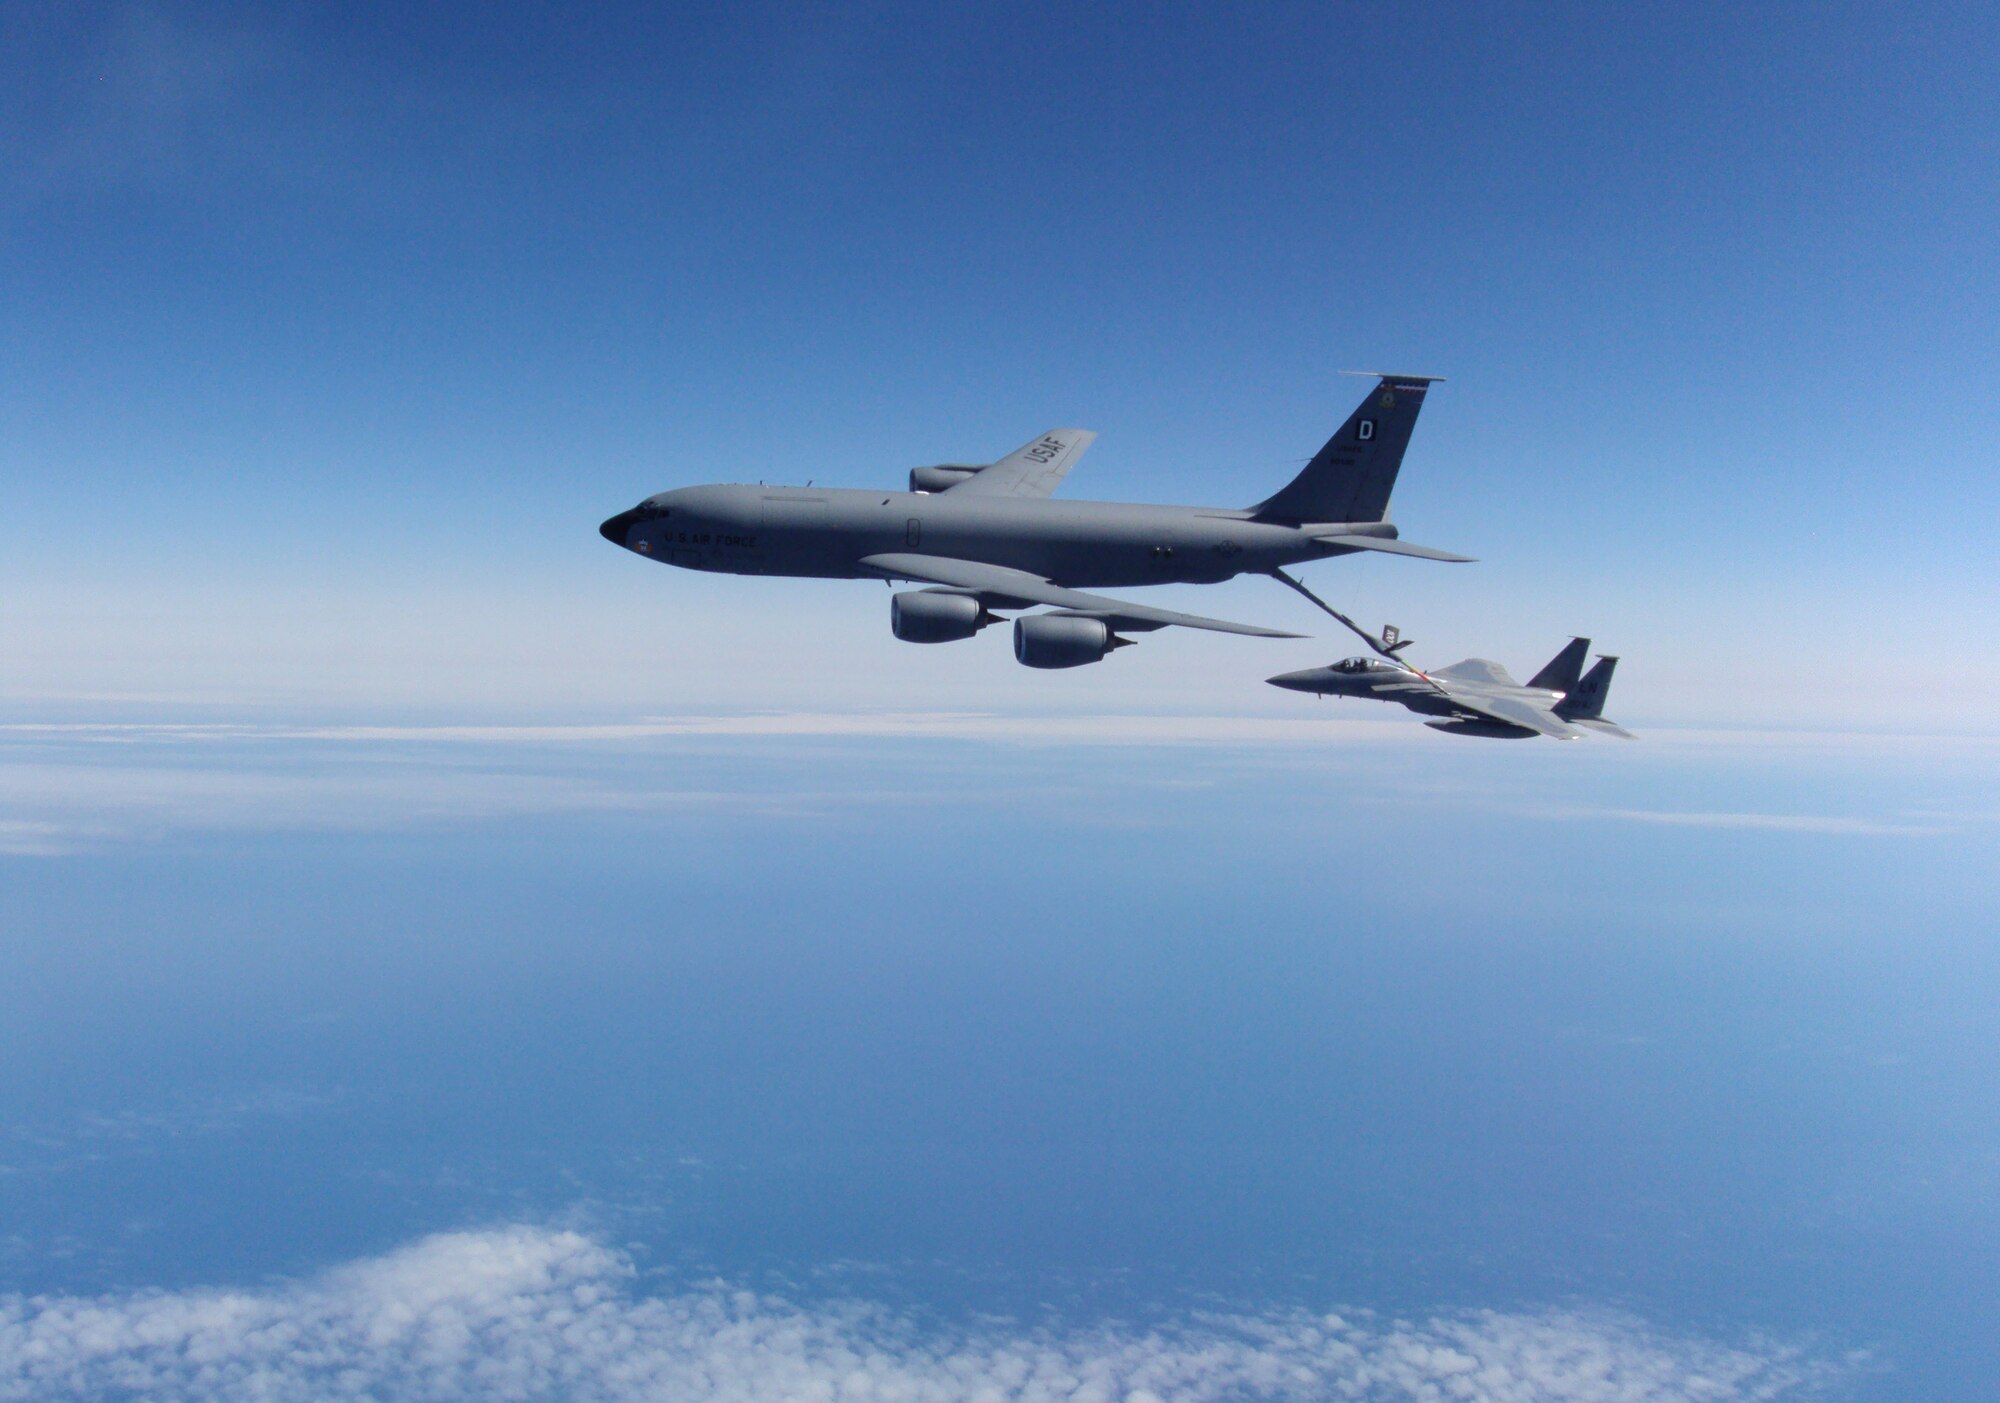 KEFLAVIK, Iceland -- A KC-135 Stratotanker, deployed from Royal Air Force Mildenhall, England, refuels an F-15C Eagle, deployed from RAF Lakenheath, England, while flying an alert mission exercise with the 493rd Expeditionary Fighter Squadron in Iceland May 22, 2012.  The squadron, made up of both U.S. Air Force and NATO personnel, is fulfilling an air policing mission that assists in assuring Iceland's air sovereignty. (Courtesy photo)